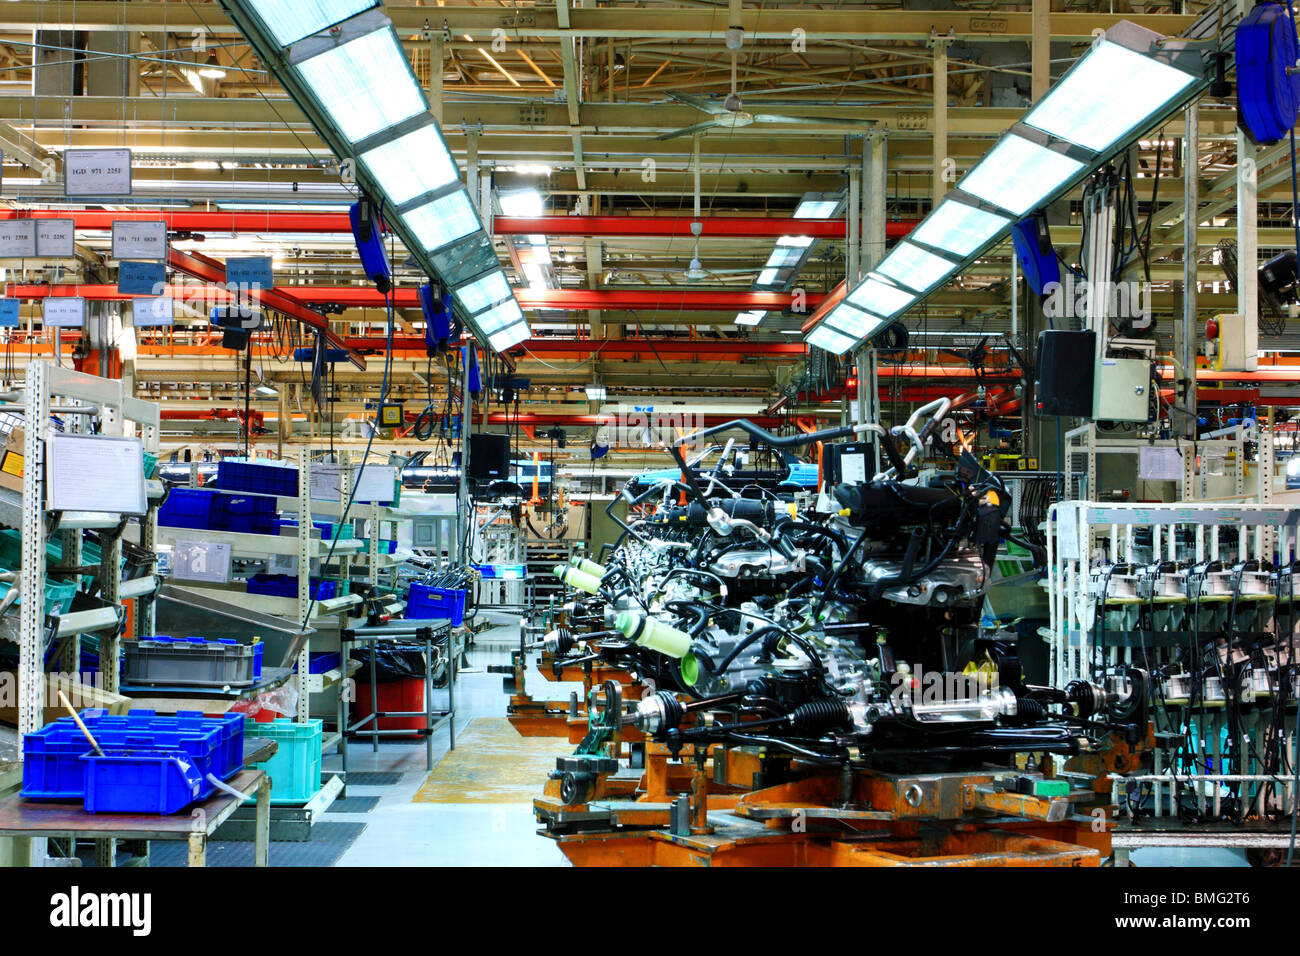 Assembly line at First Automobile Works, Changchun, Jilin Province, China Stock Photo